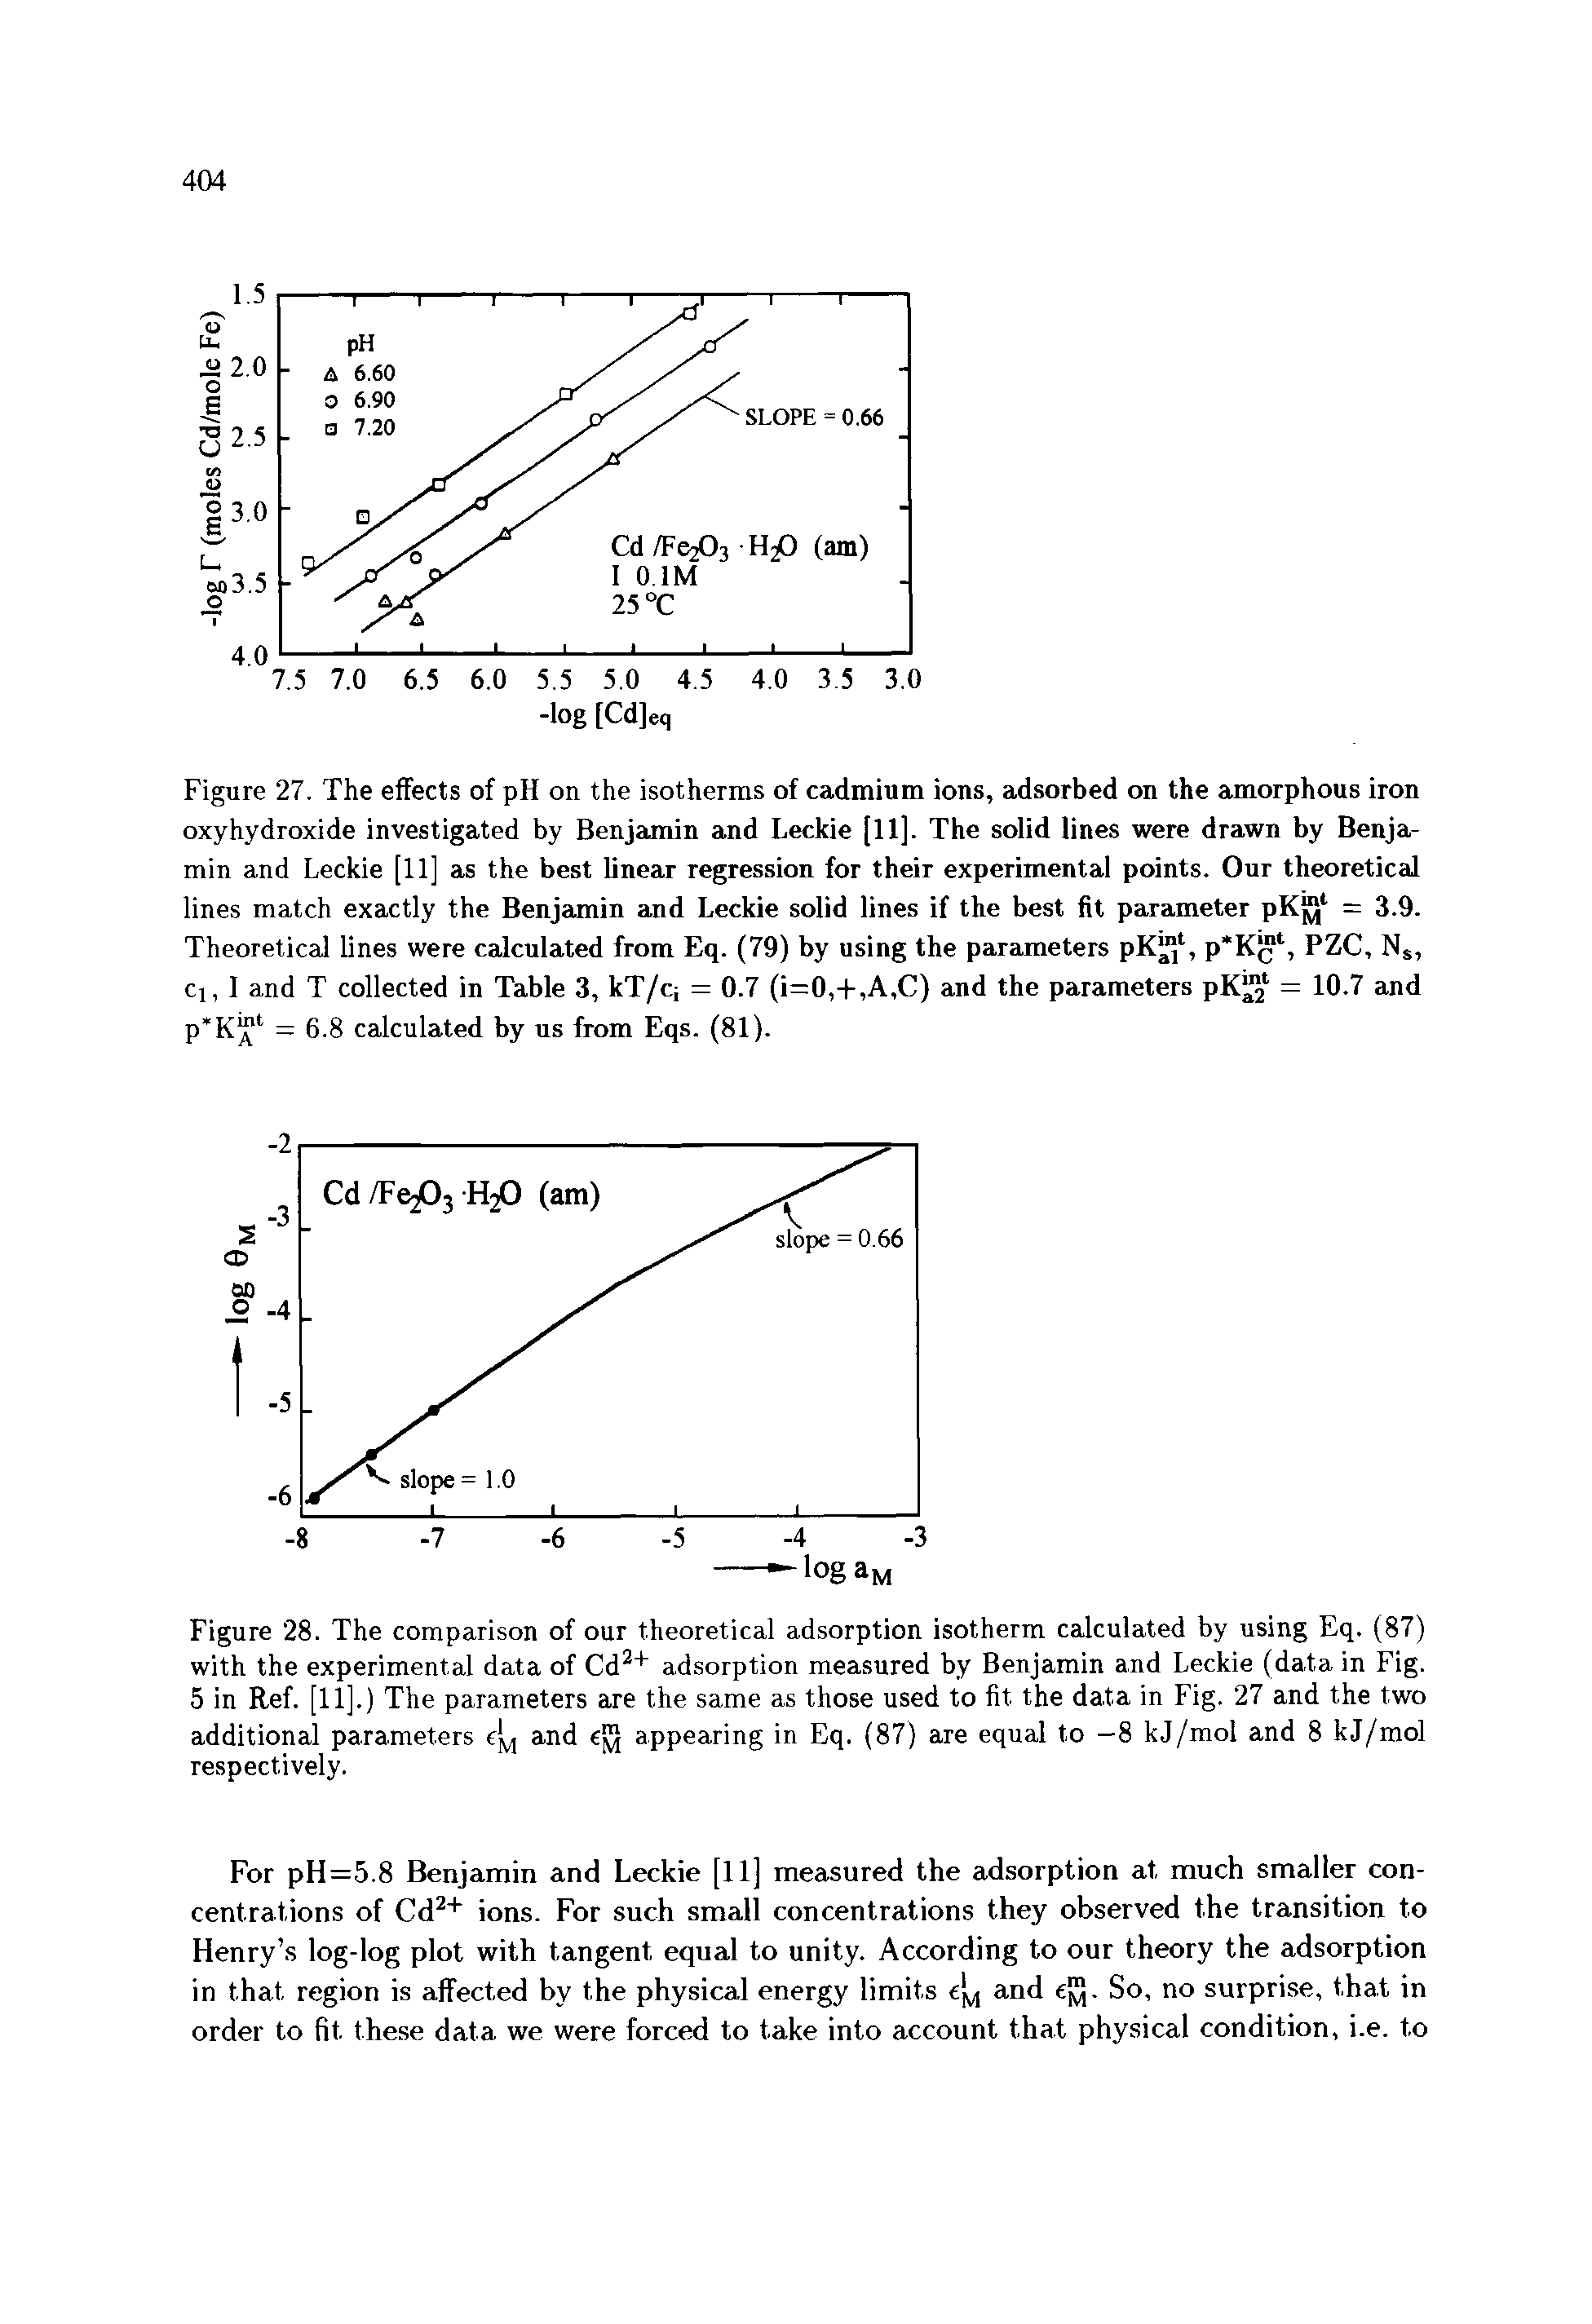 Figure 27. The effects of pH on the isotherms of cadmium ions, adsorbed on the amorphous iron oxyhydroxide investigated by Benjamin and Leckie [11]. The solid lines were drawn by Benjamin and Leckie [11] as the best linear regression for their experimental points. Our theoretical lines match exactly the Benjamin and Leckie solid lines if the best fit parameter pK = 3.9. Theoretical lines were calculated from Eq. (79) by using the parameters pK , p K , PZC, Ns, Cl, I and T collected in Table 3, kT/c = 0.7 (i=0,+,A,C) and the parameters pK = 10.7 and p K]C = 6.8 calculated by us from Eqs. (81).